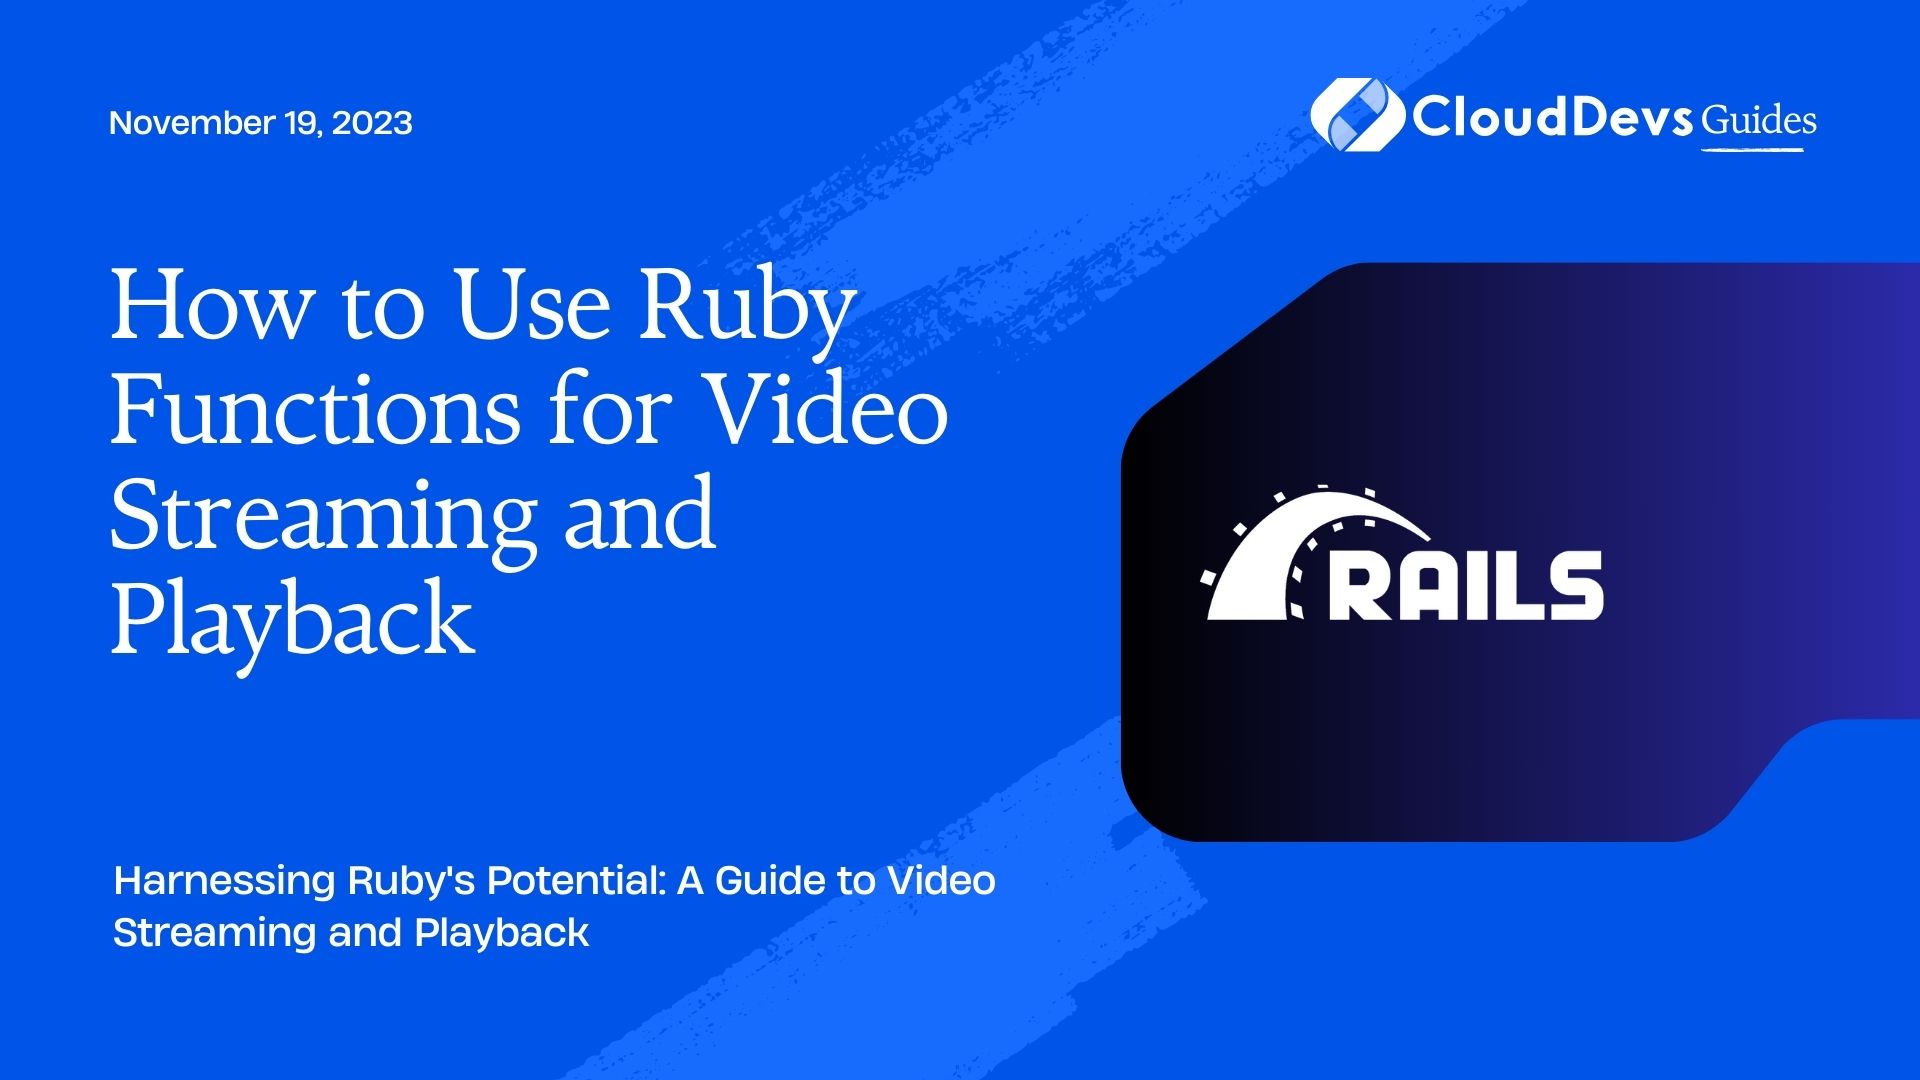 How to Use Ruby Functions for Video Streaming and Playback